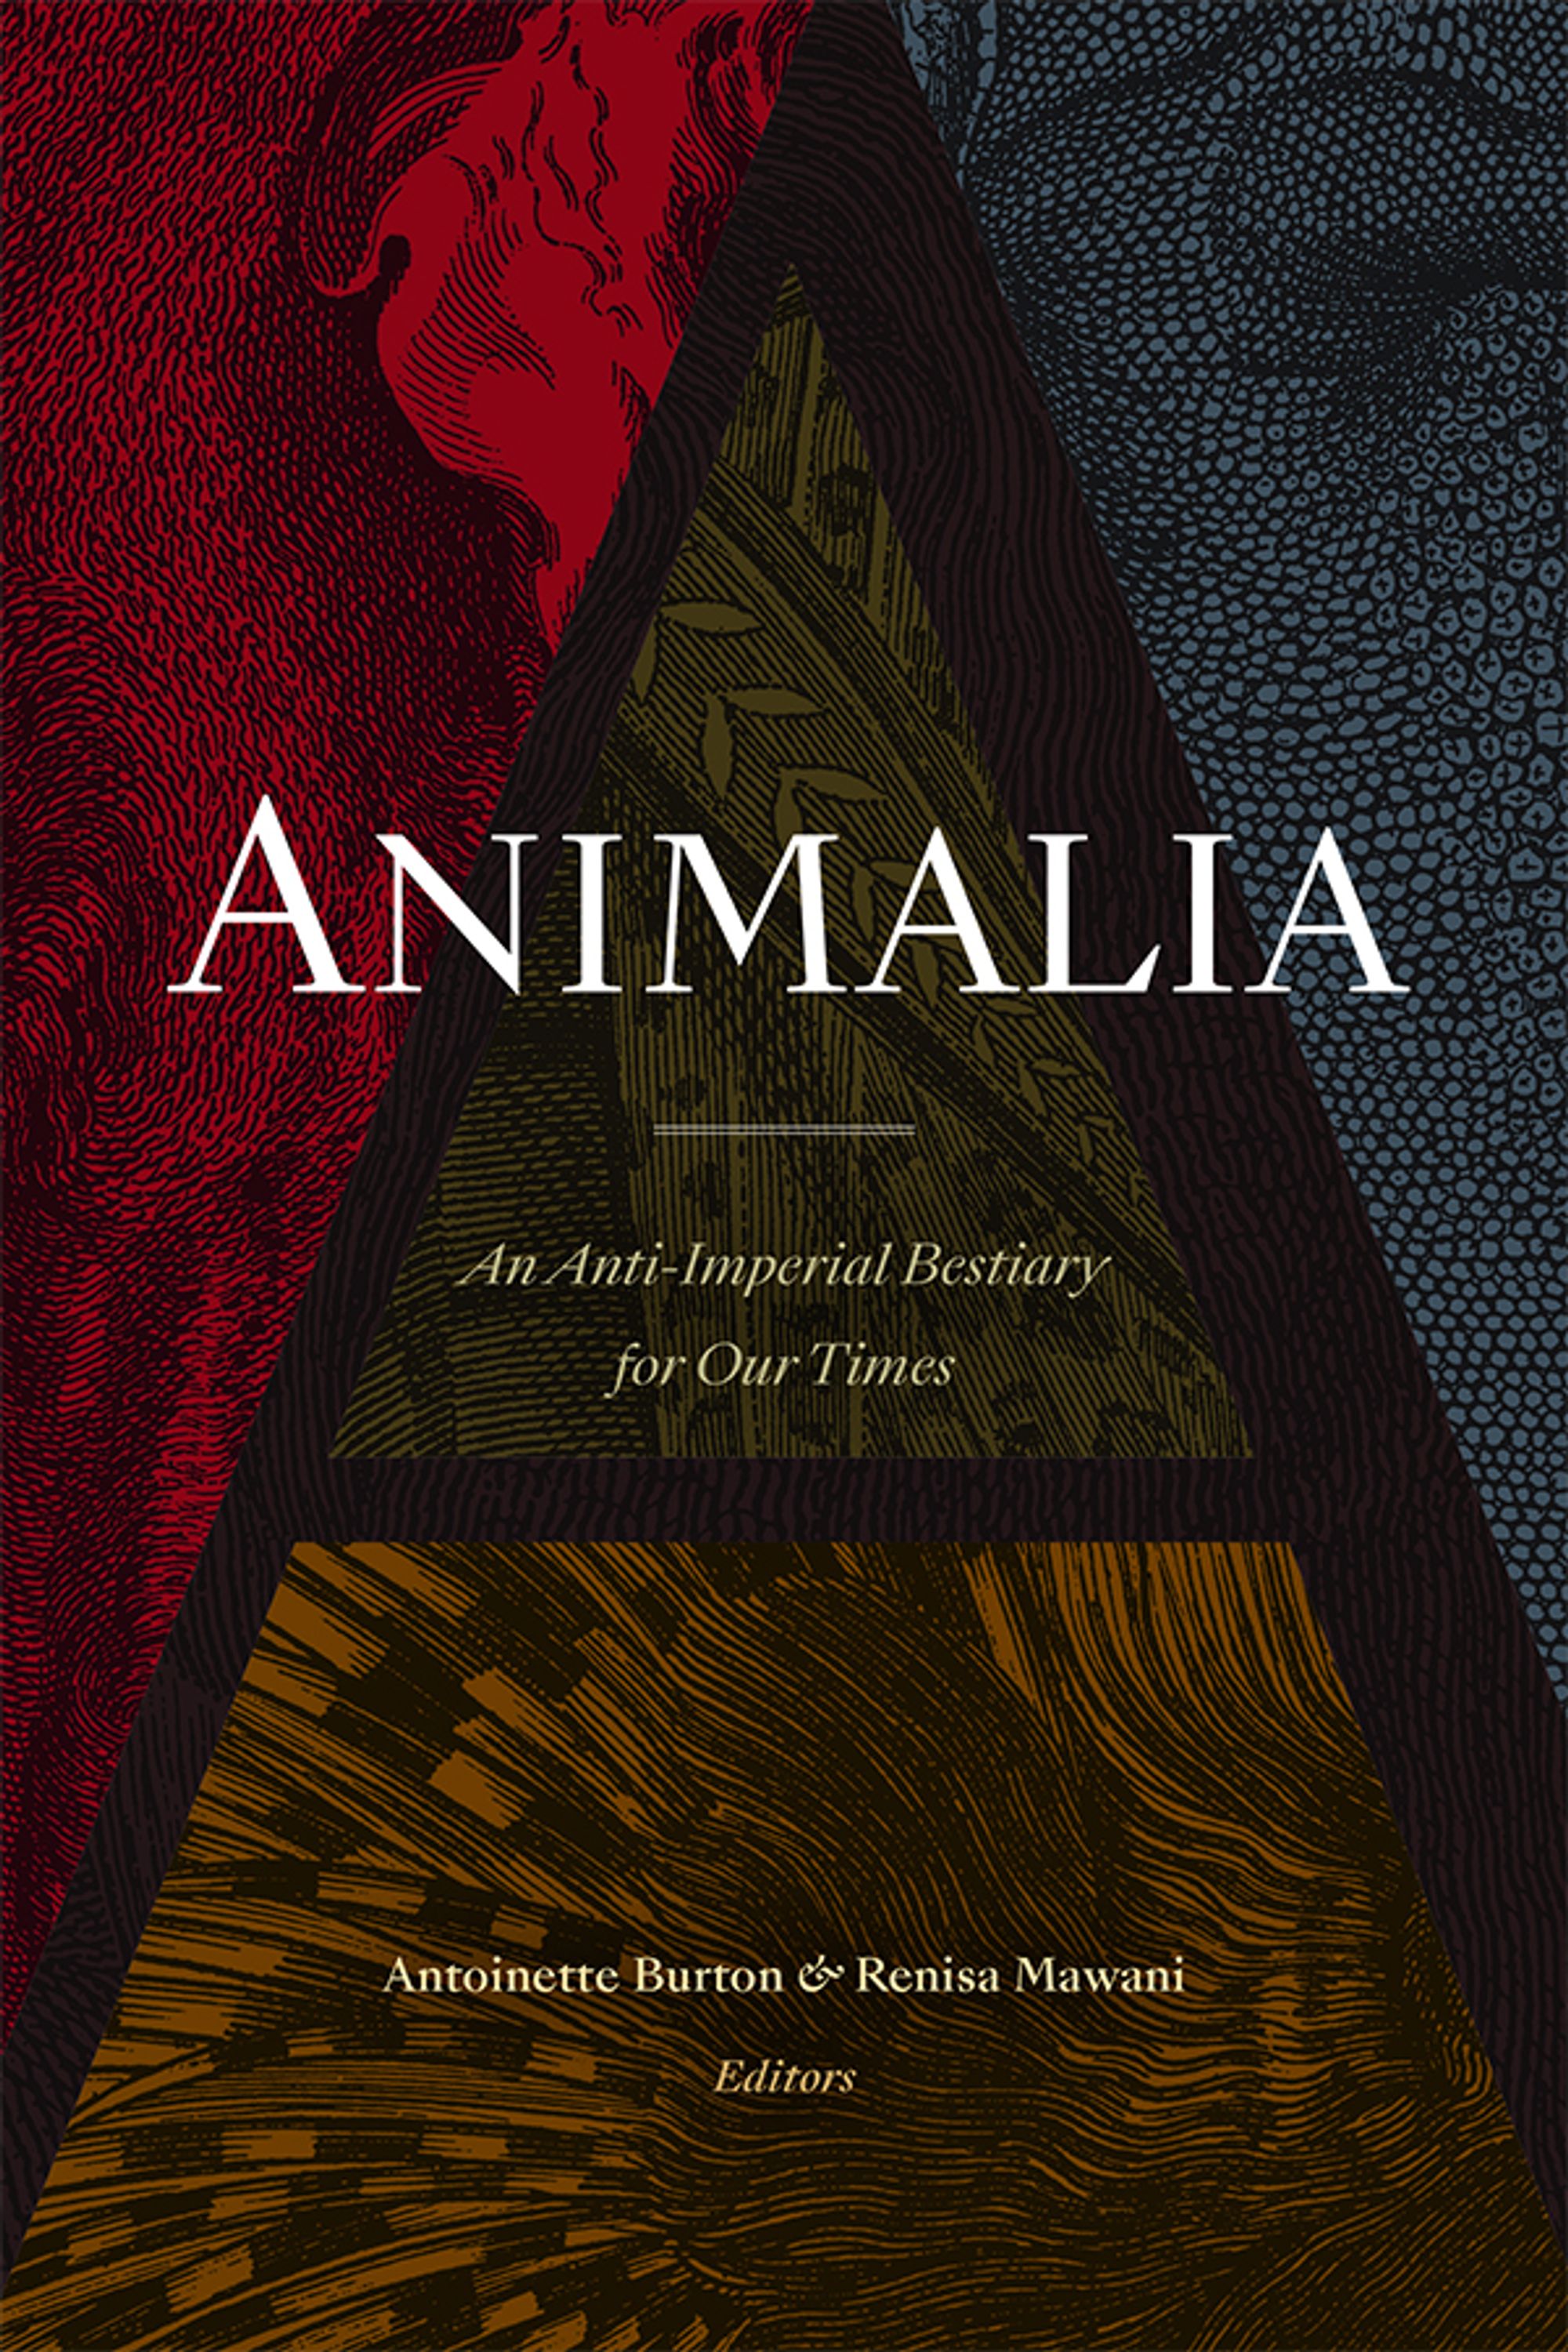 A book cover titled Animalia. A Giant A in the centre is flanked by red and dark blue abstract patterns on either side.